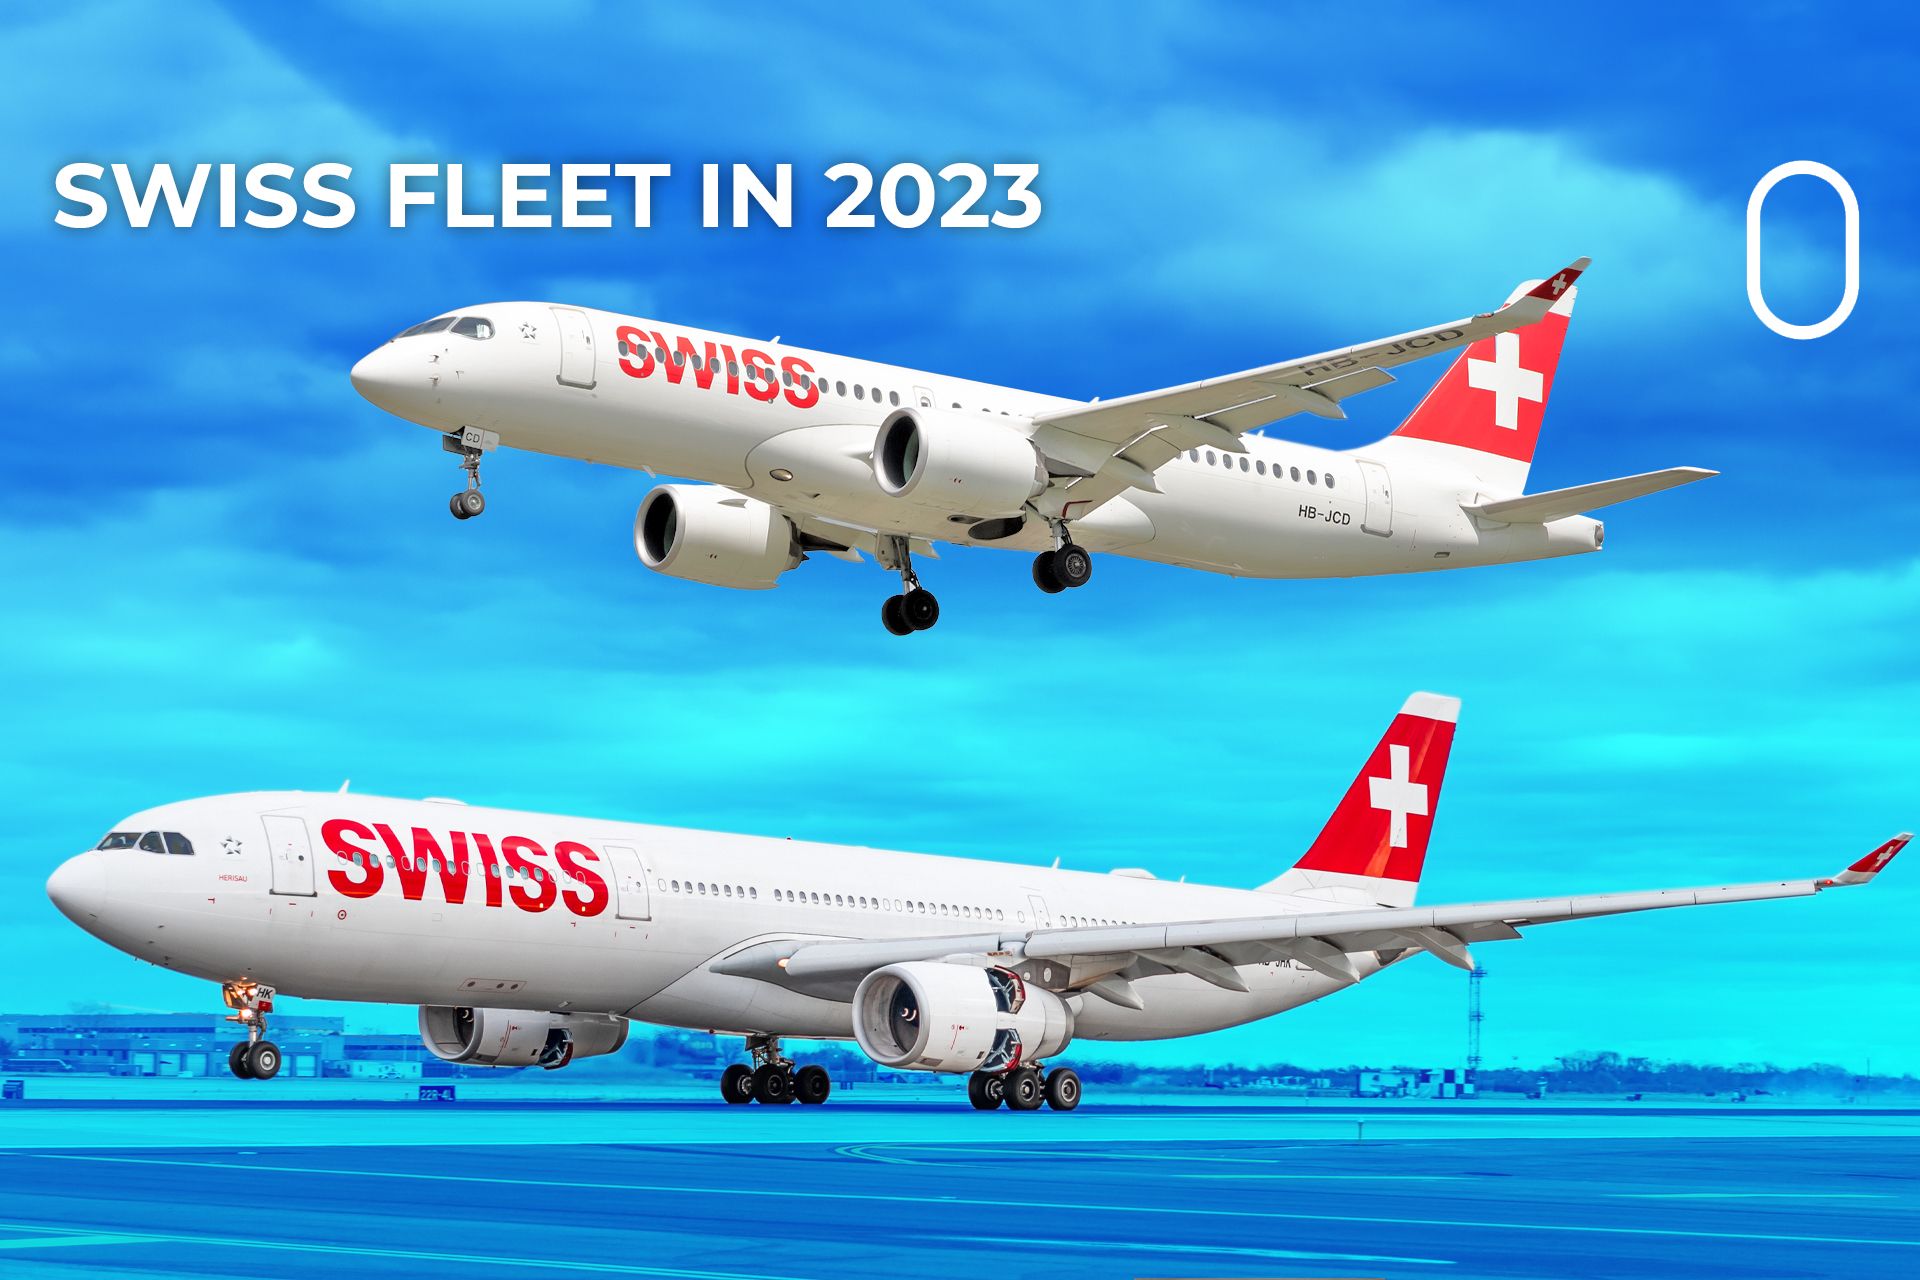 A Look At The Numerous SWISS Fleet In 2023